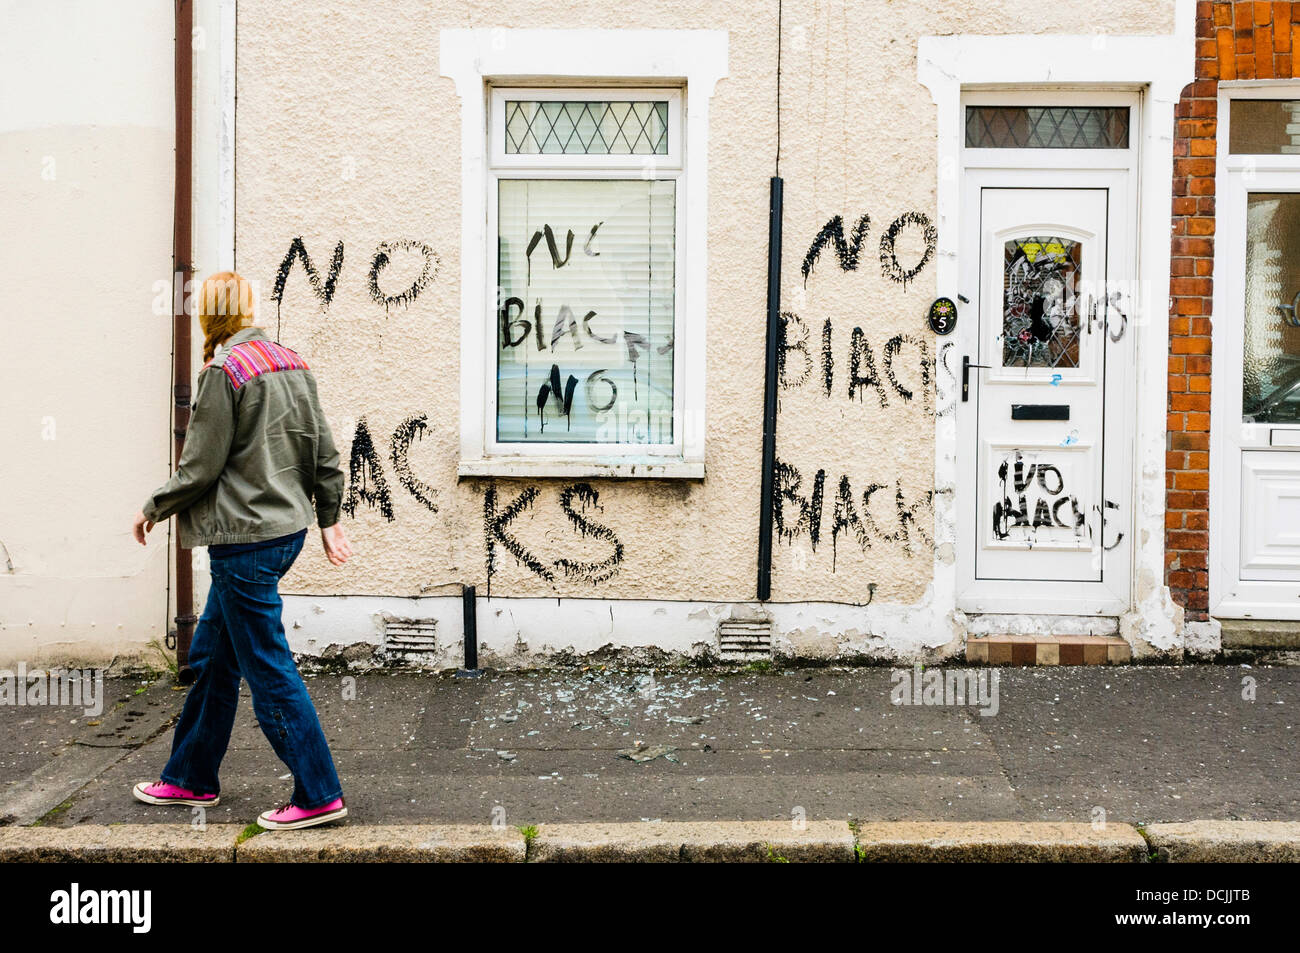 Belfast, Northern Ireland, UK. 19th August 2013 - A woman looks at racist graffiti written on the walls of a house recently occupied by two Nigerian men in Belfast. Credit:  Stephen Barnes/Alamy Live News Stock Photo